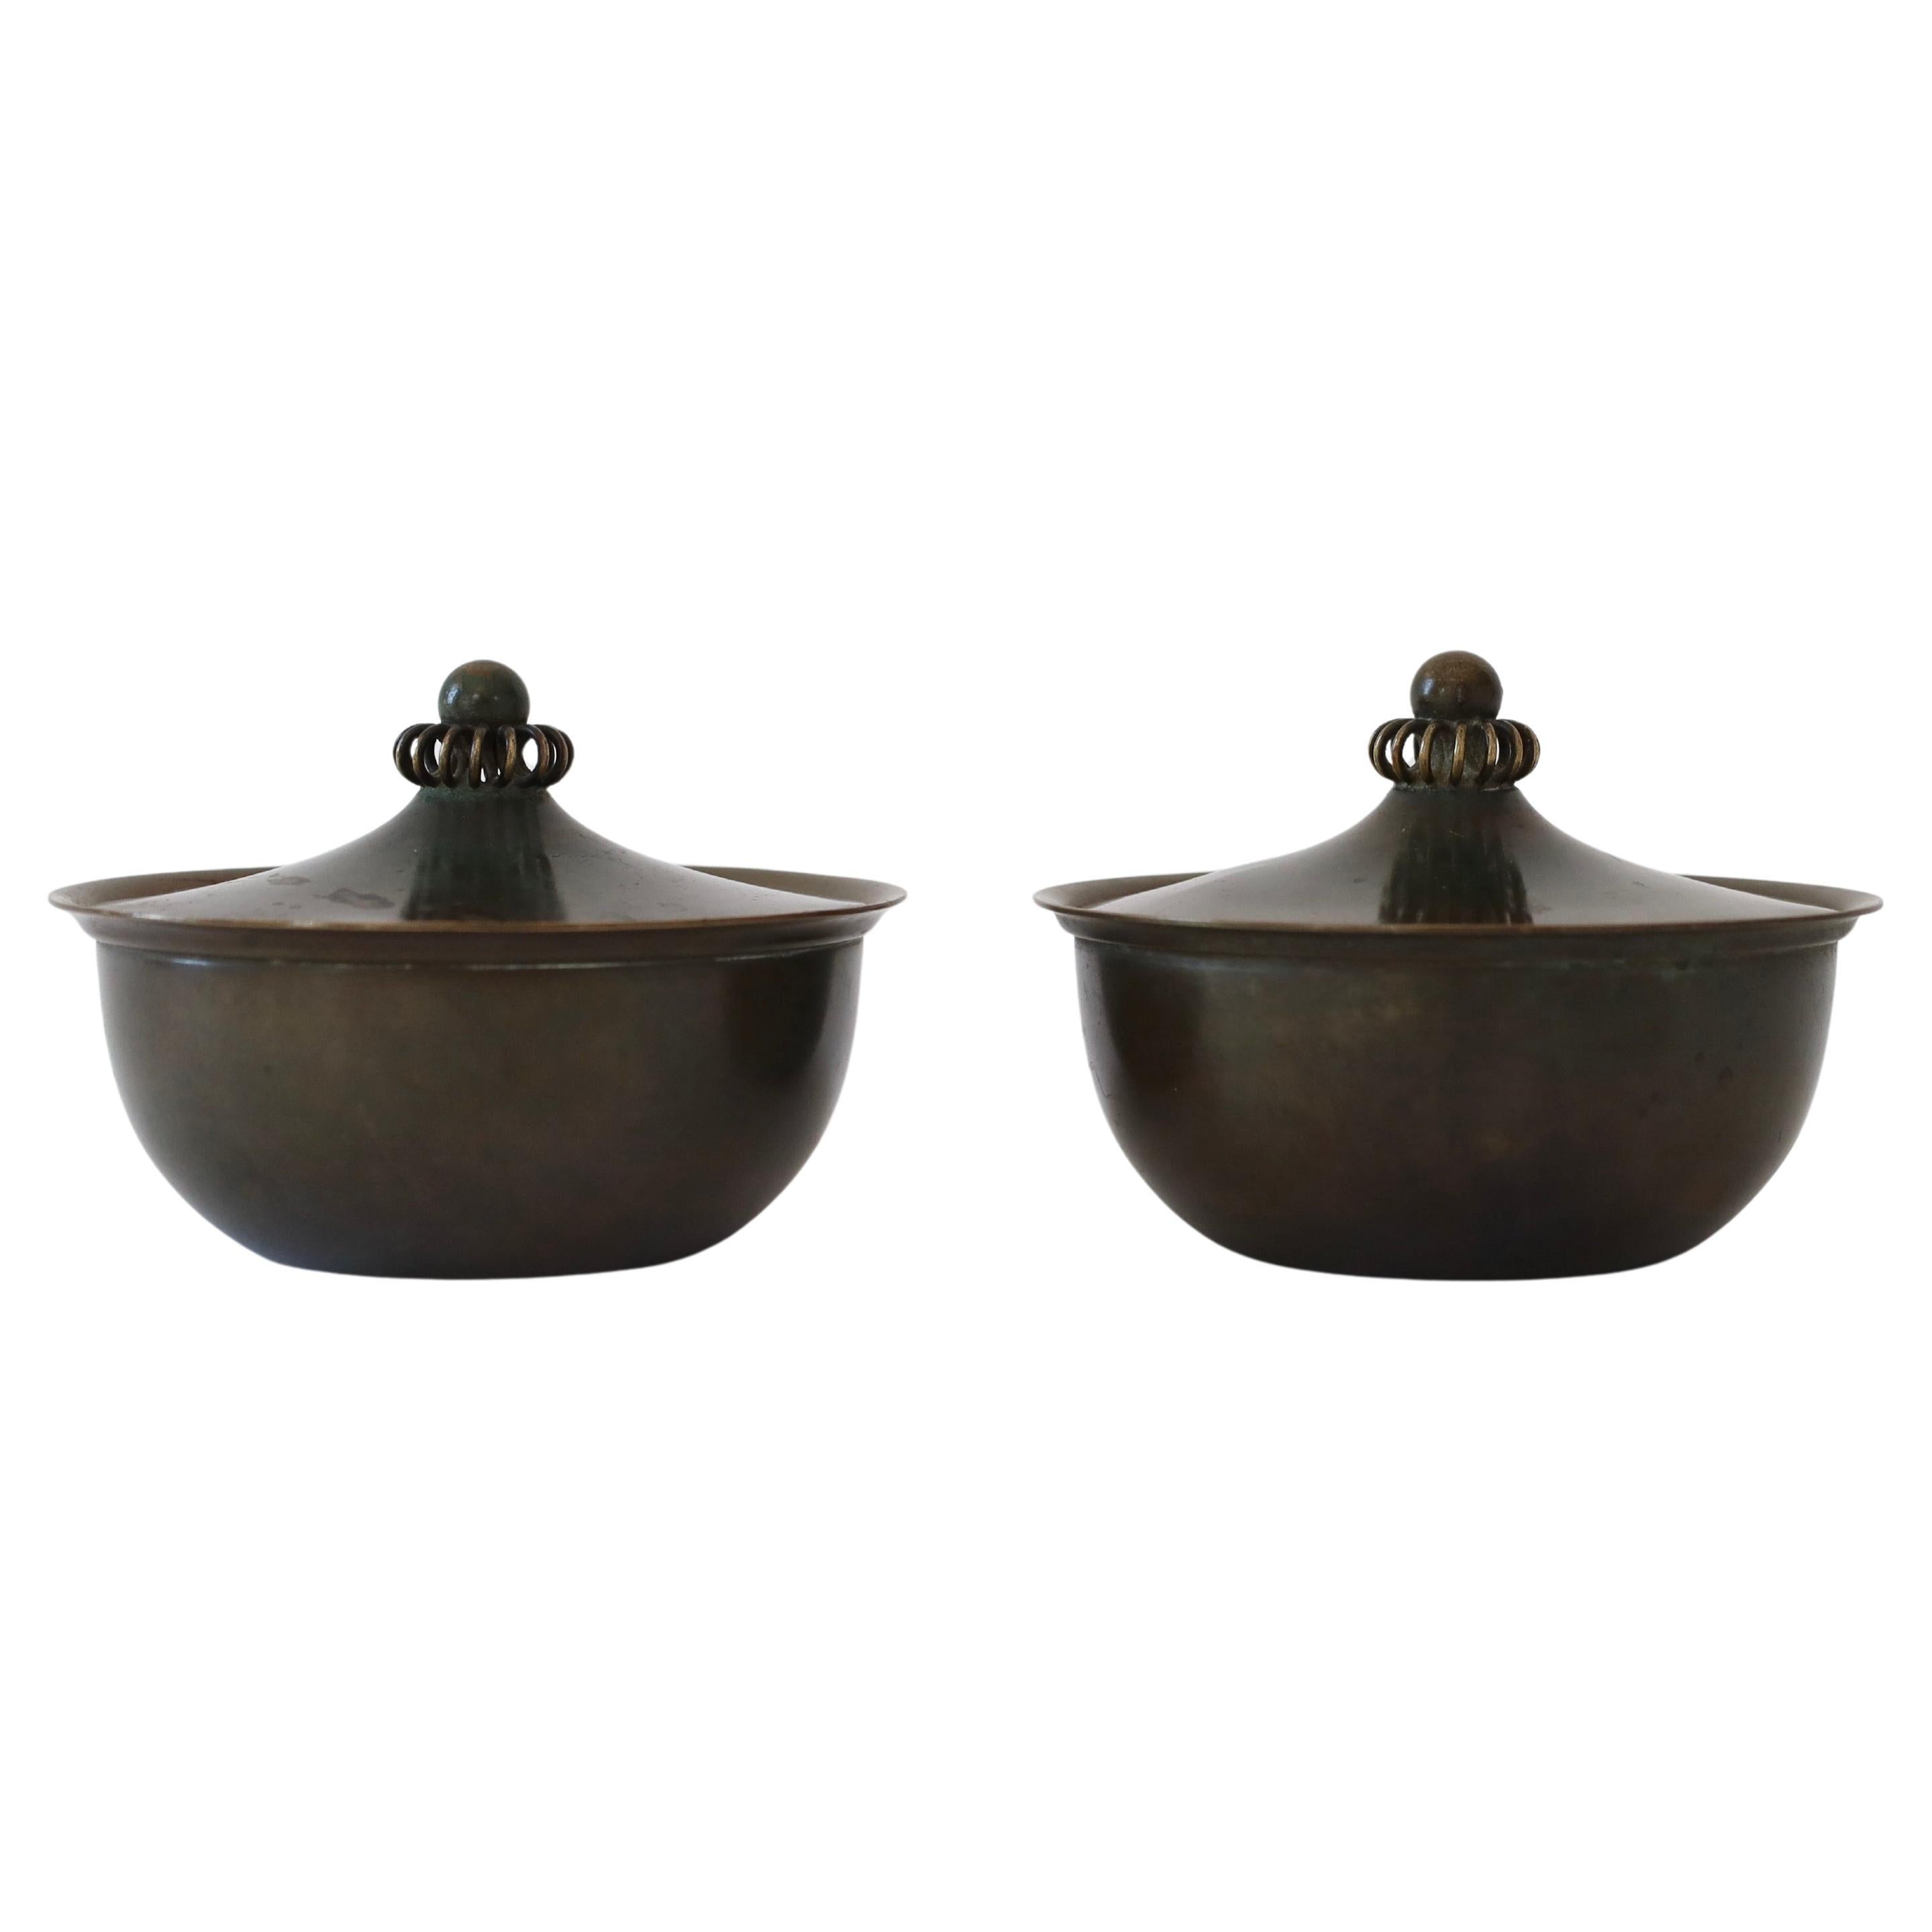 Set of Bronze Jewelry boxes by Just Andersen, 1930s, Denmark